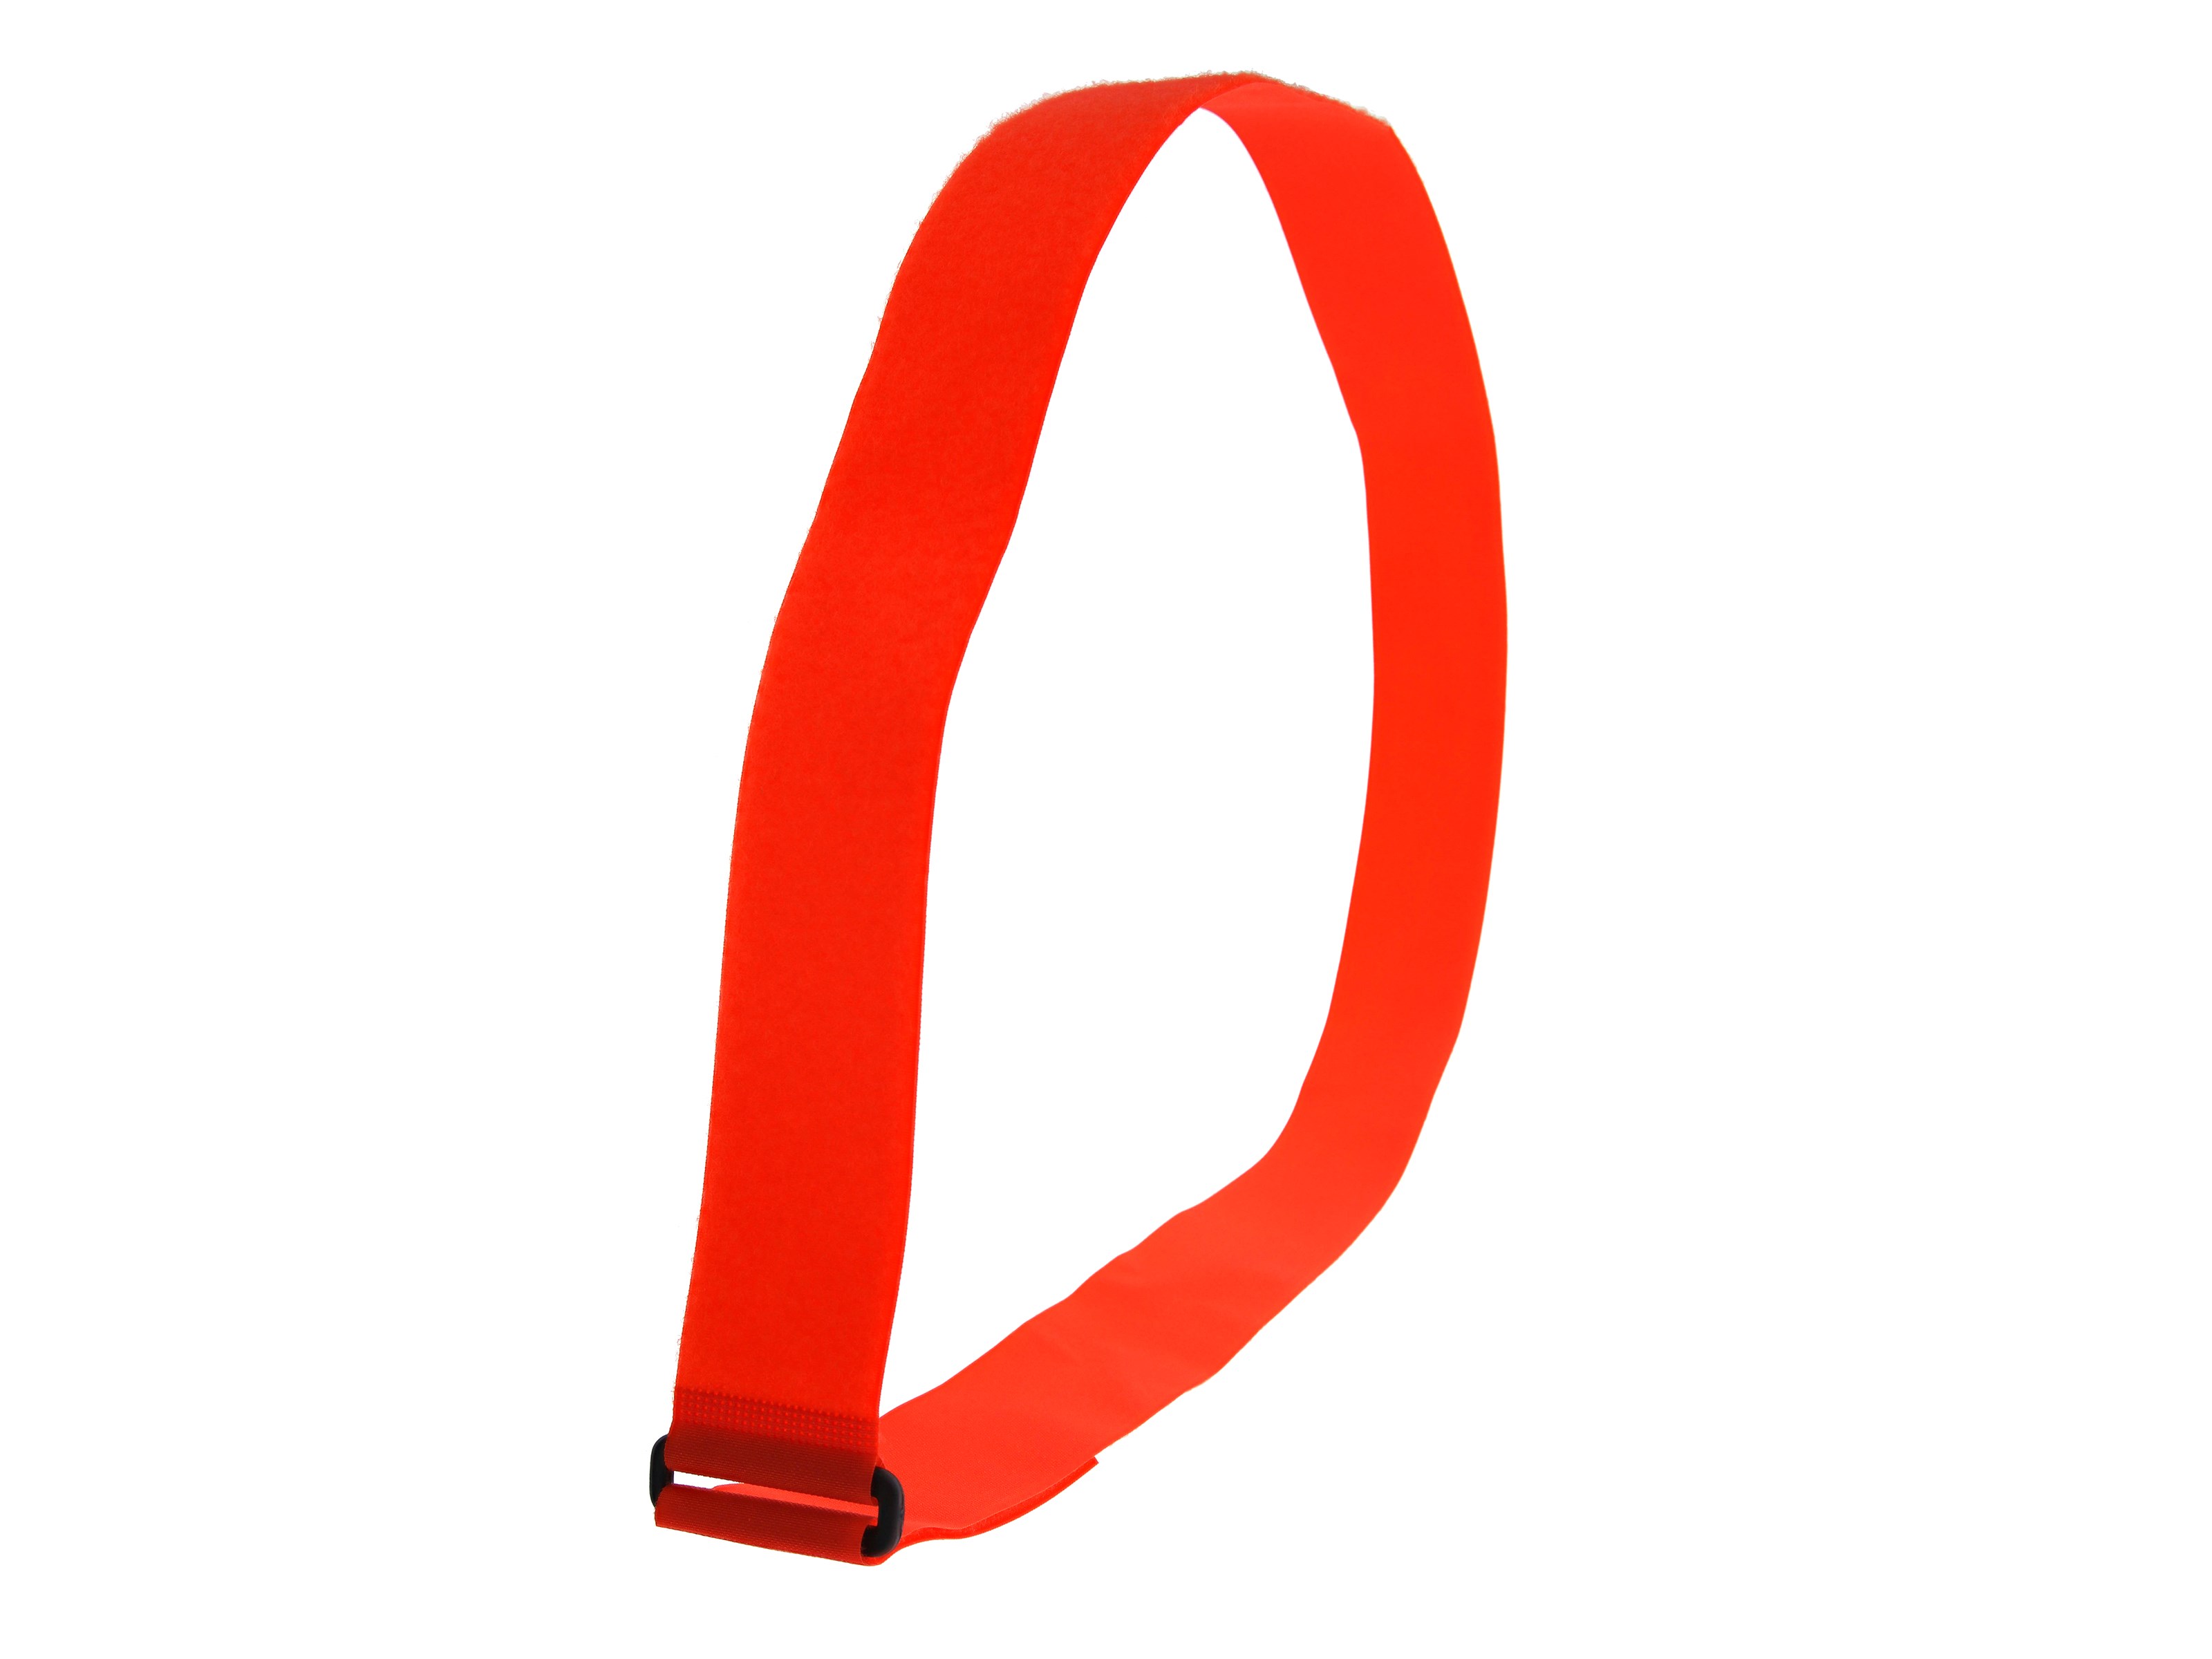 60 x 2 Inch Orange Cinch Strap - 1 Pack - Secure™ Cable Ties